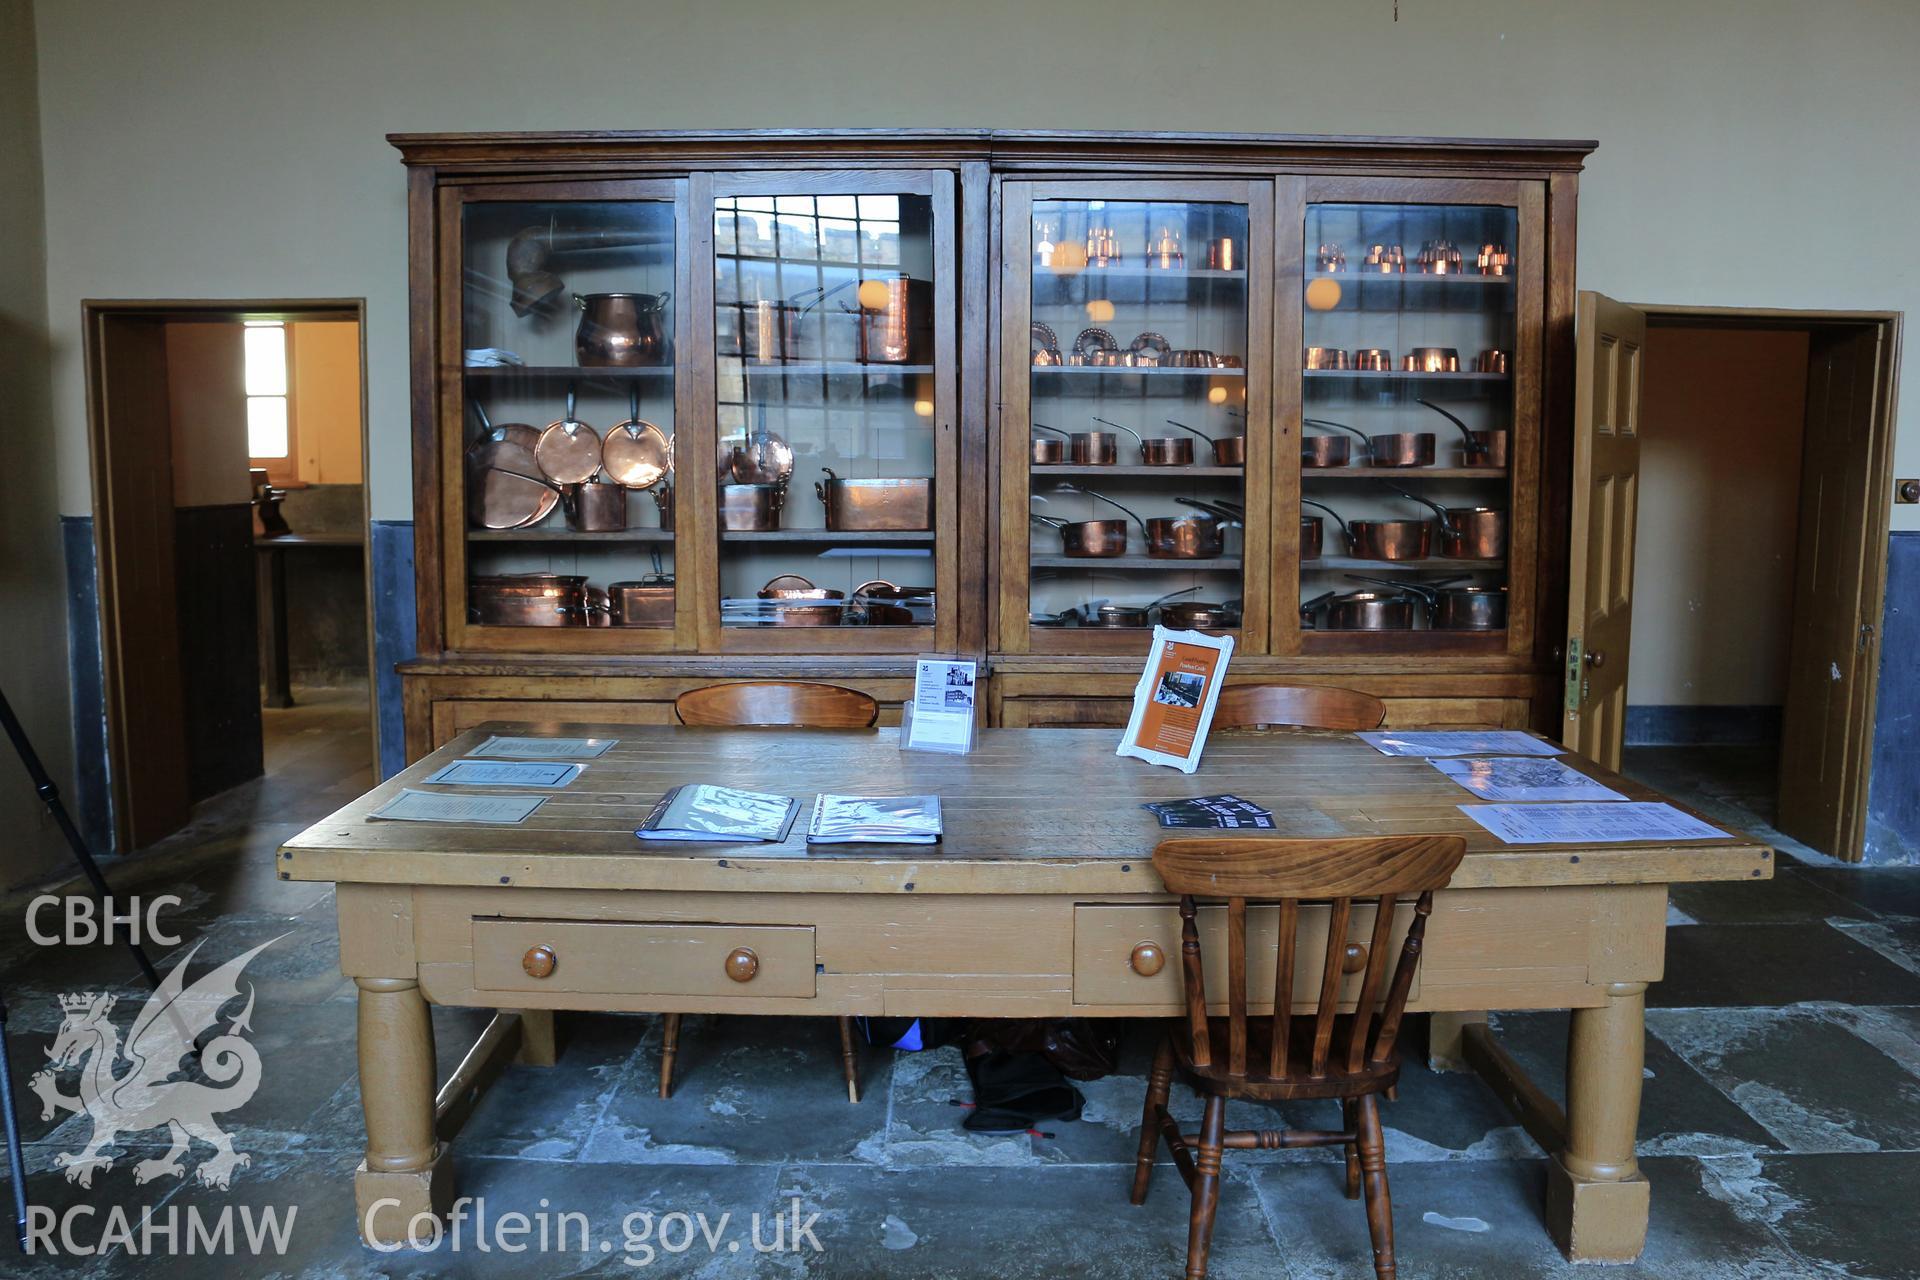 Photographic survey of Penrhyn Castle, Bangor. Kitchens, table and cabinet with copper pots.